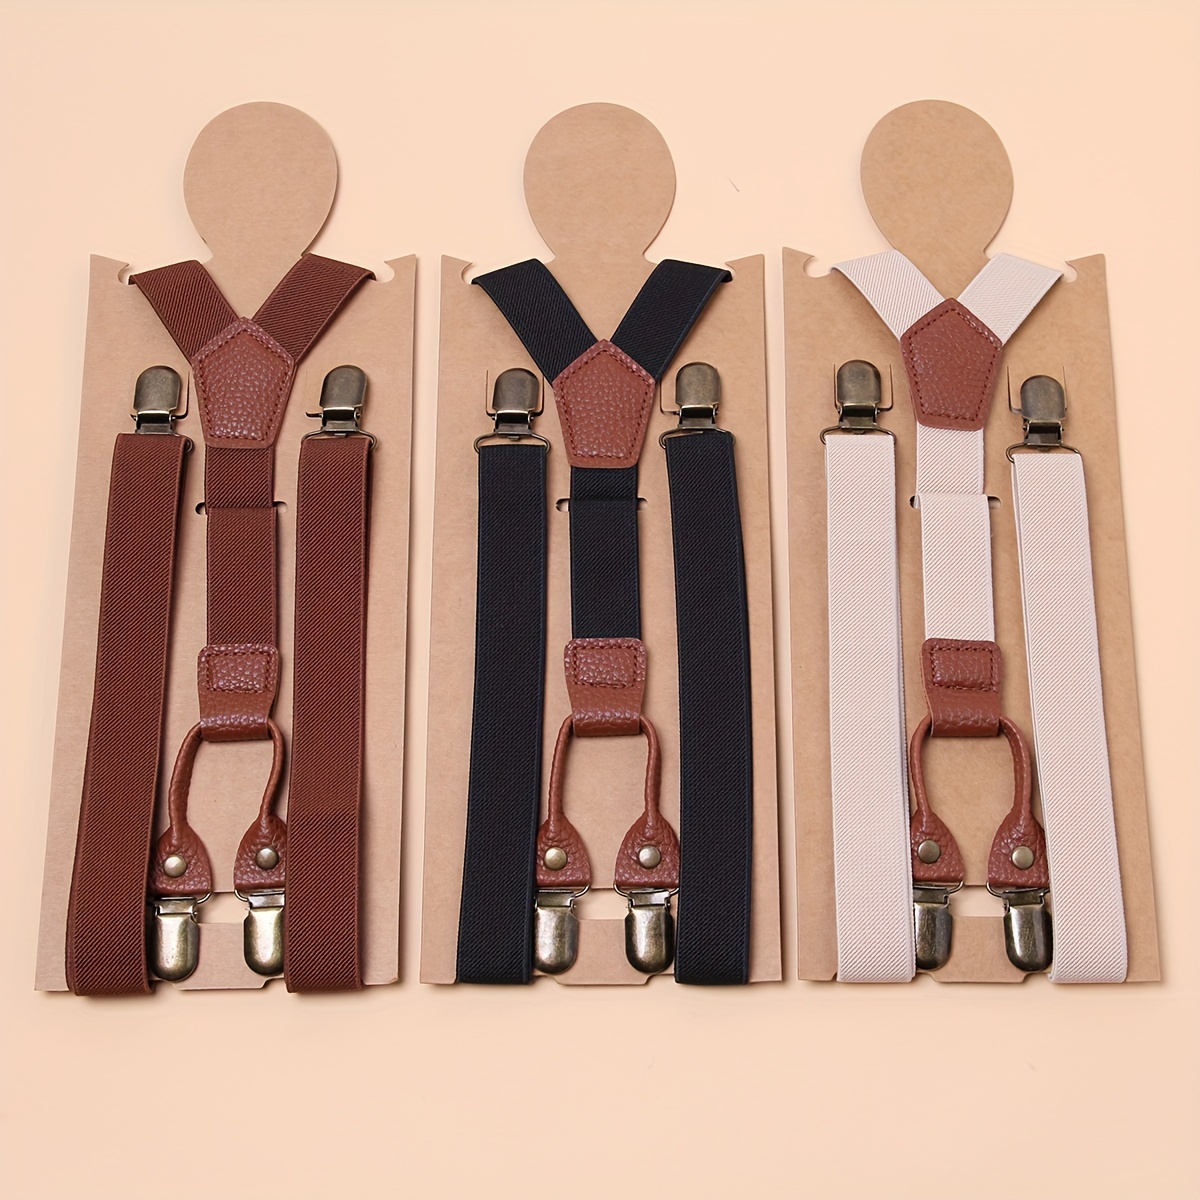 

Vintage Style Men's Suspenders - Elastane Material With Rivet Details, Strappy Back Design, Woven With Medium Stretch, Adjustable Length - Classic Solid Color Y-back Suspender With 4 Bronze Clips